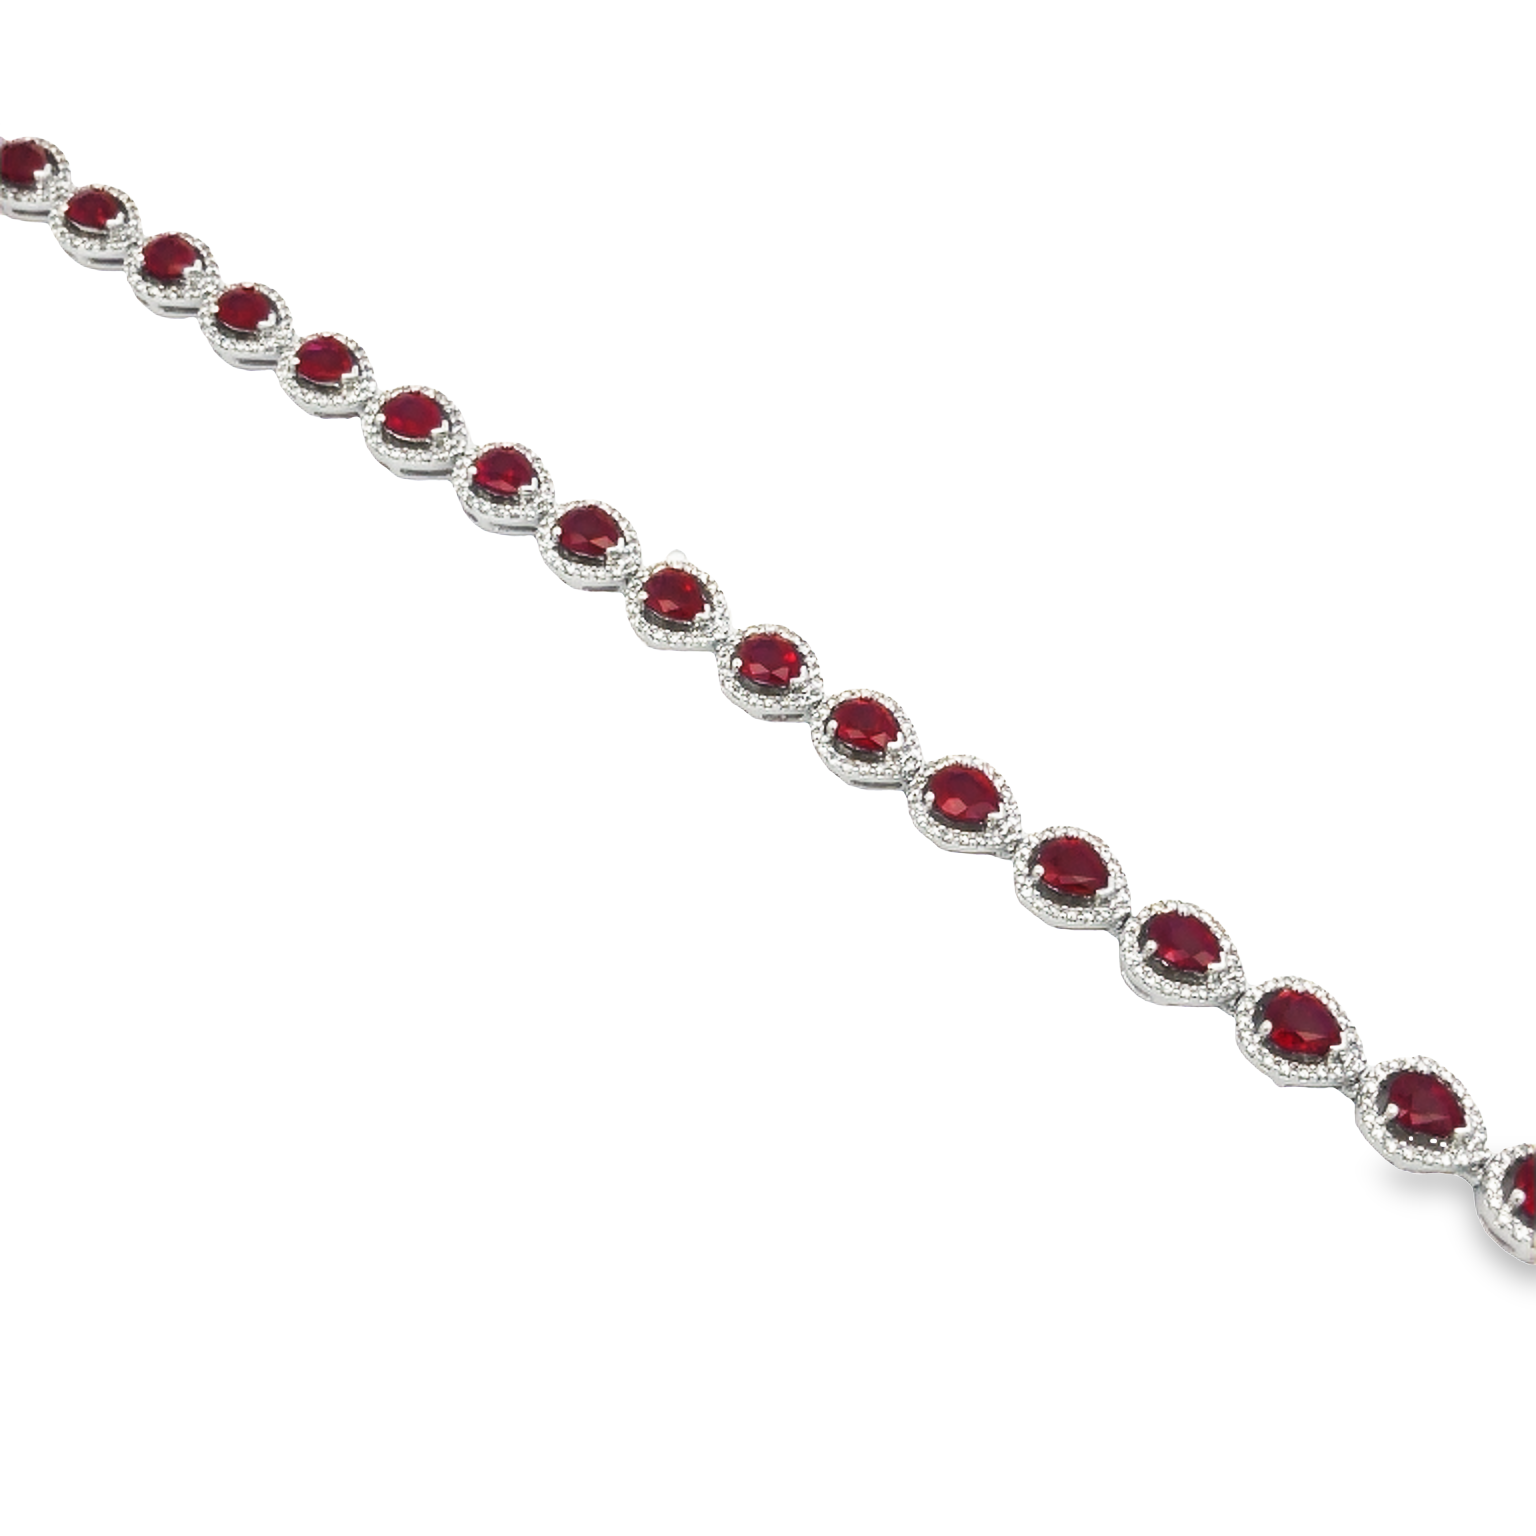 18K White Gold Ruby and Diamond Bracelet with 21 Pear Rubies